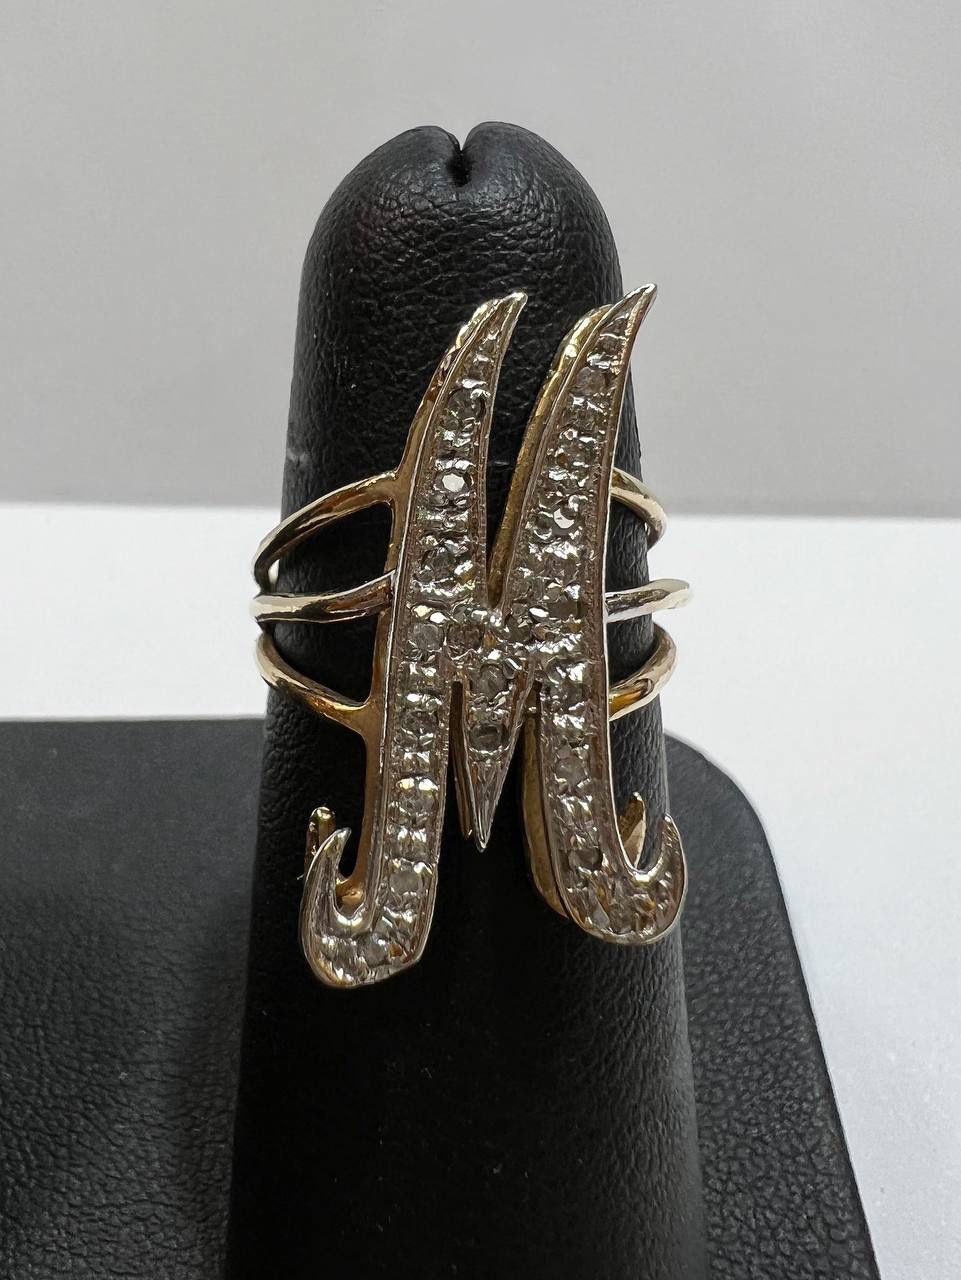 14k yellow gold diamond ring with letter “M”